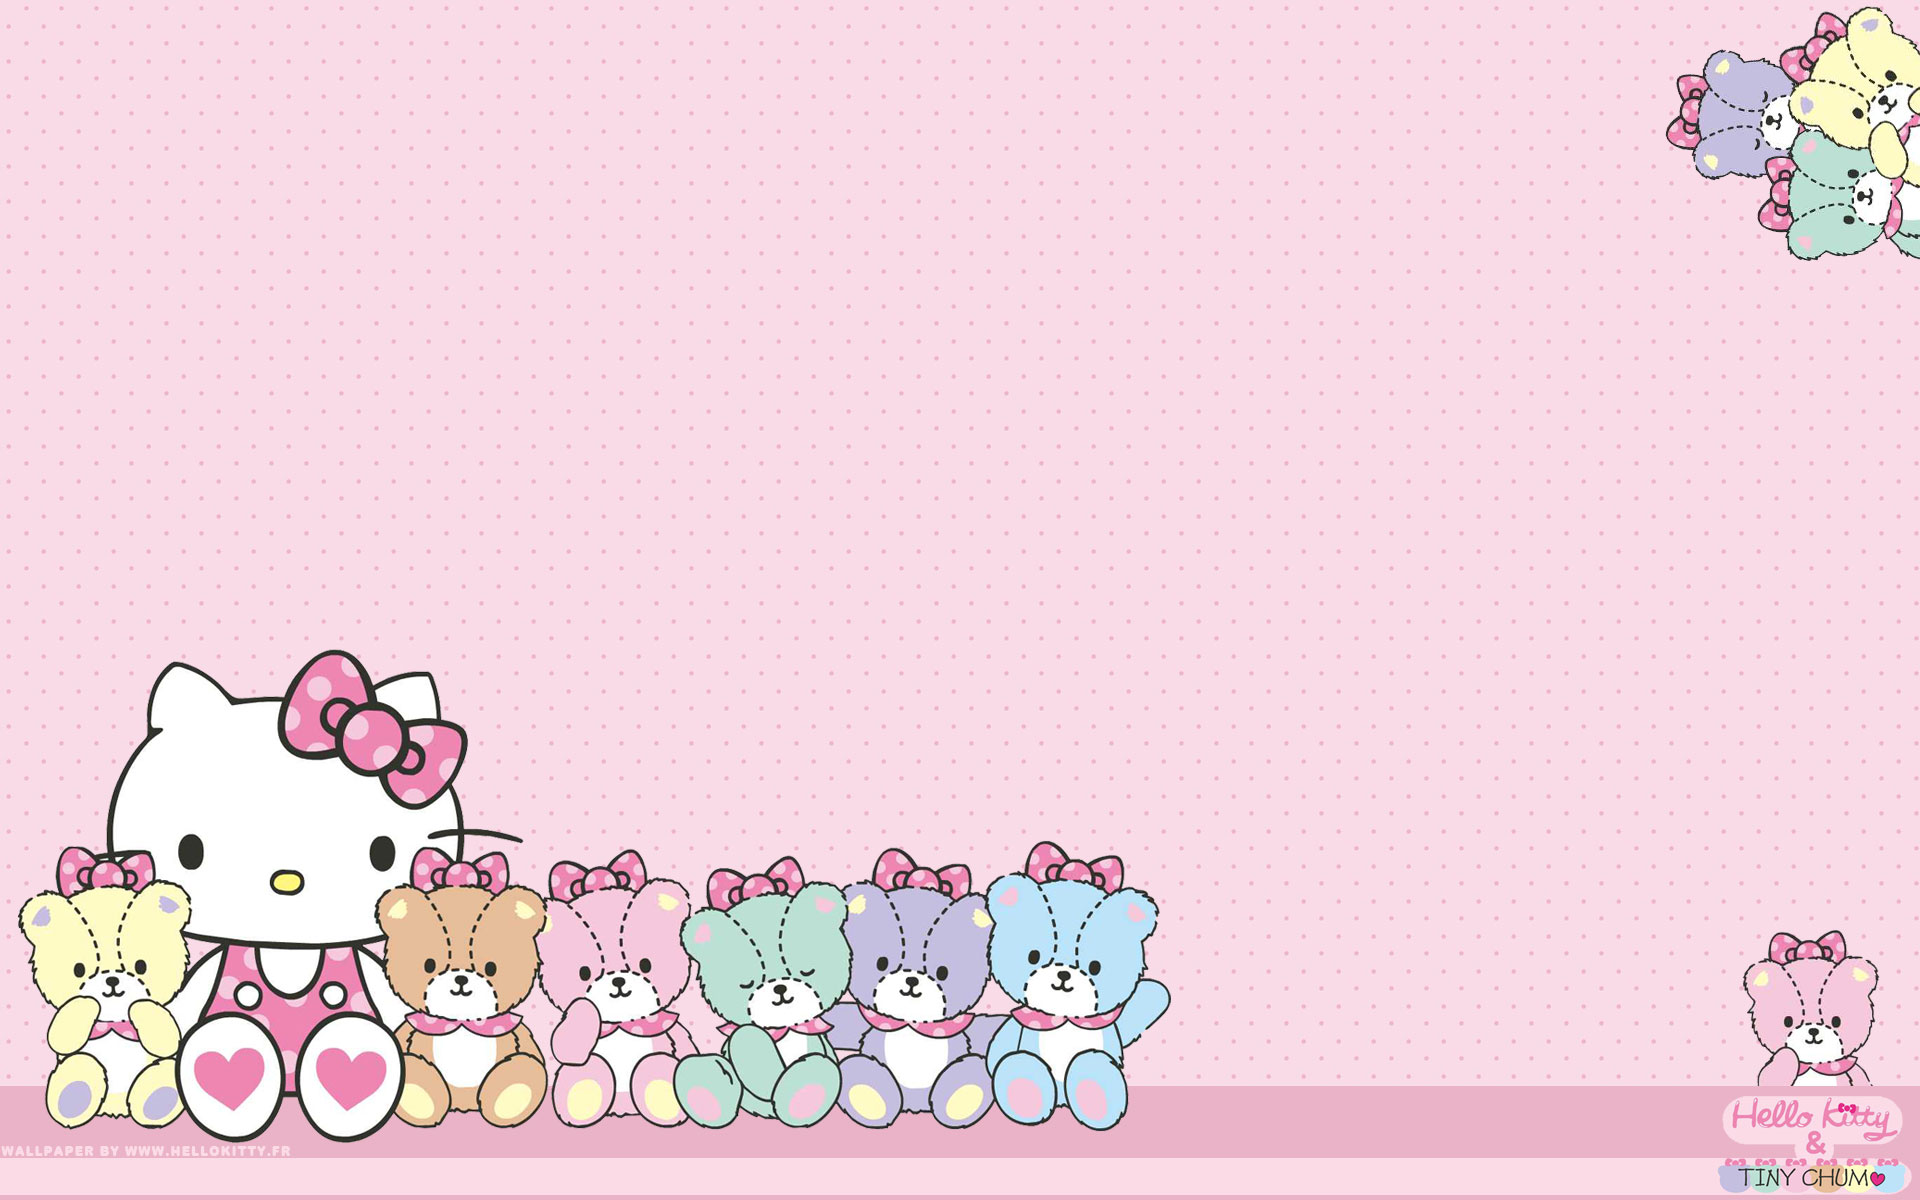 Free Download Hello Kitty Wallpapers Wallpaper High Definition High Quality 19x10 For Your Desktop Mobile Tablet Explore 50 High Resolution Hello Kitty Wallpaper Hello Kitty Wallpaper Desktop Cute Hello